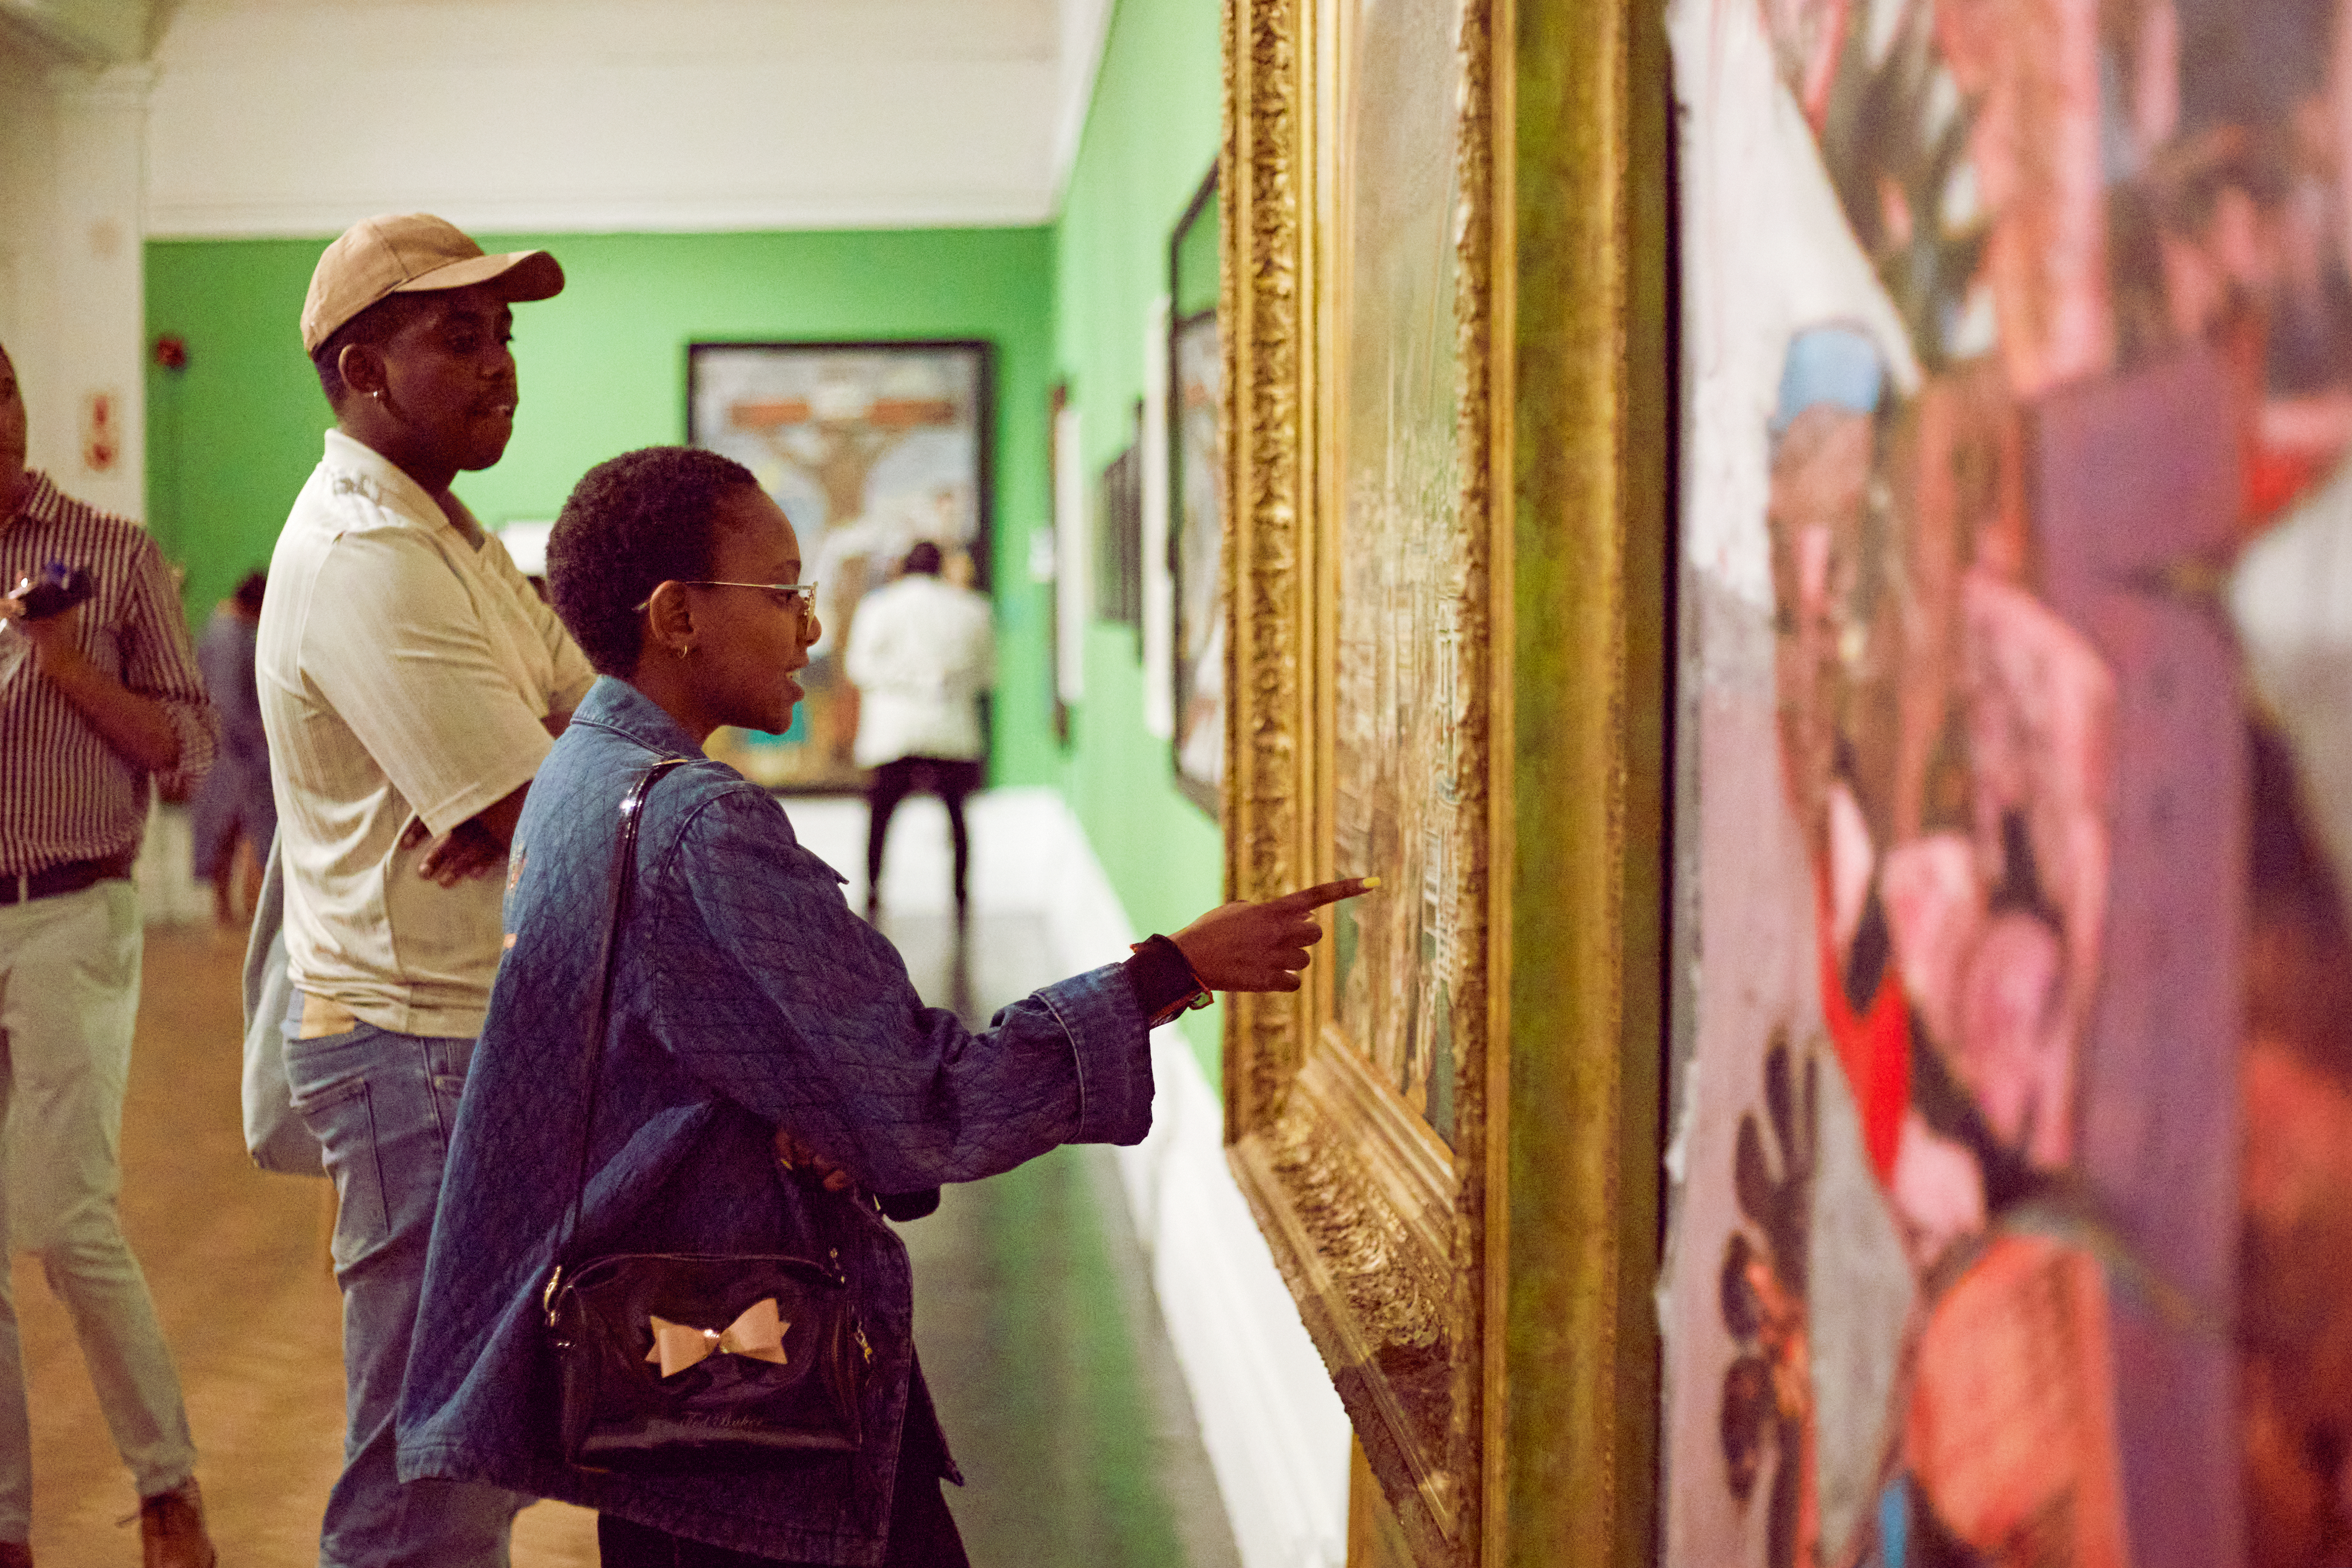 'Breaking Down the Walls' on show at the Iziko South African National Gallery. Image: Iziko Museums of South Africa/N Pamplin.